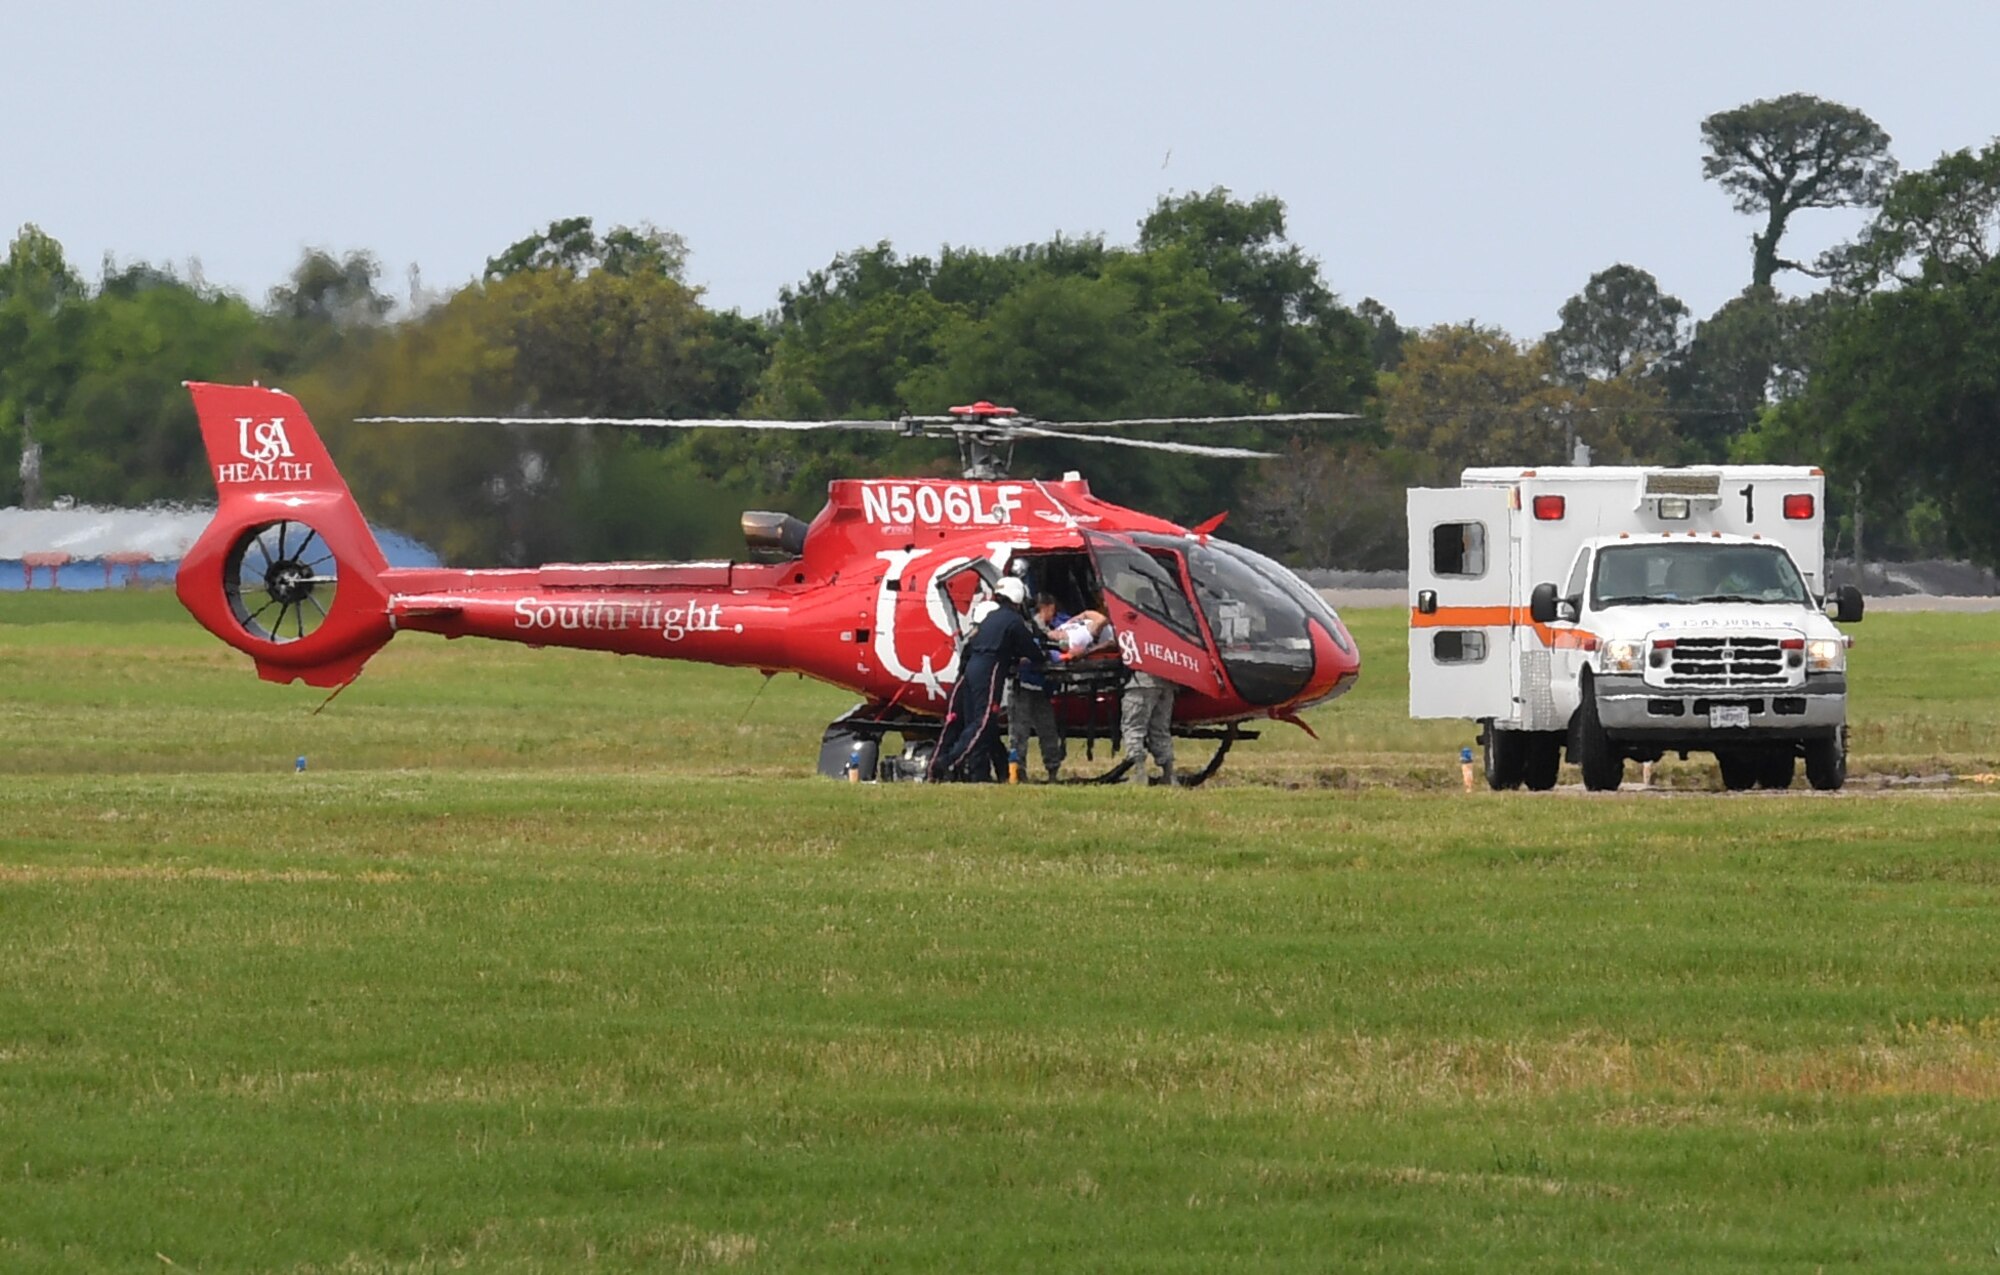 Members of the 81st Medical Group transports a "victim" onto the University of South Alabama Medical Center SouthFlight Helicopter during a mass casualty and response exercise on Keesler Air Force Base, Mississippi, April 17, 2019. The scenario for the two-day event included a simulated plane crash with debris landing both on and off base in crowds of people. The exercise tested base and local civilian emergency response organizations' ability to operate in a multi-agency and multi-jurisdiction crisis situation. (U.S. Air Force photo by Kemberly Groue)